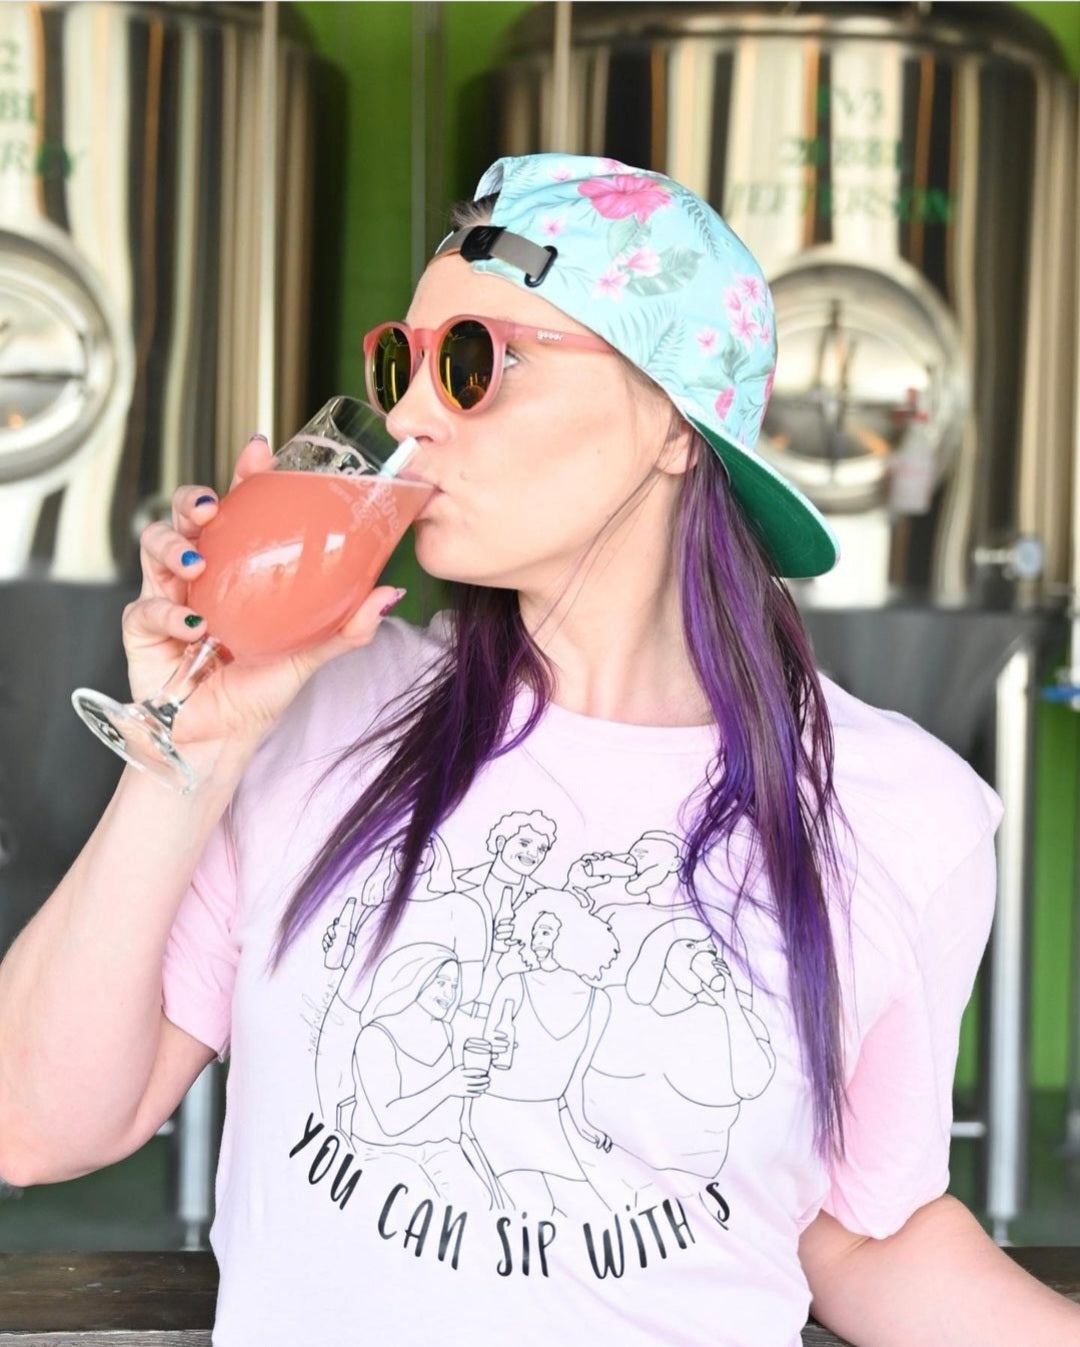 You CAN Sip With Us unisex tee